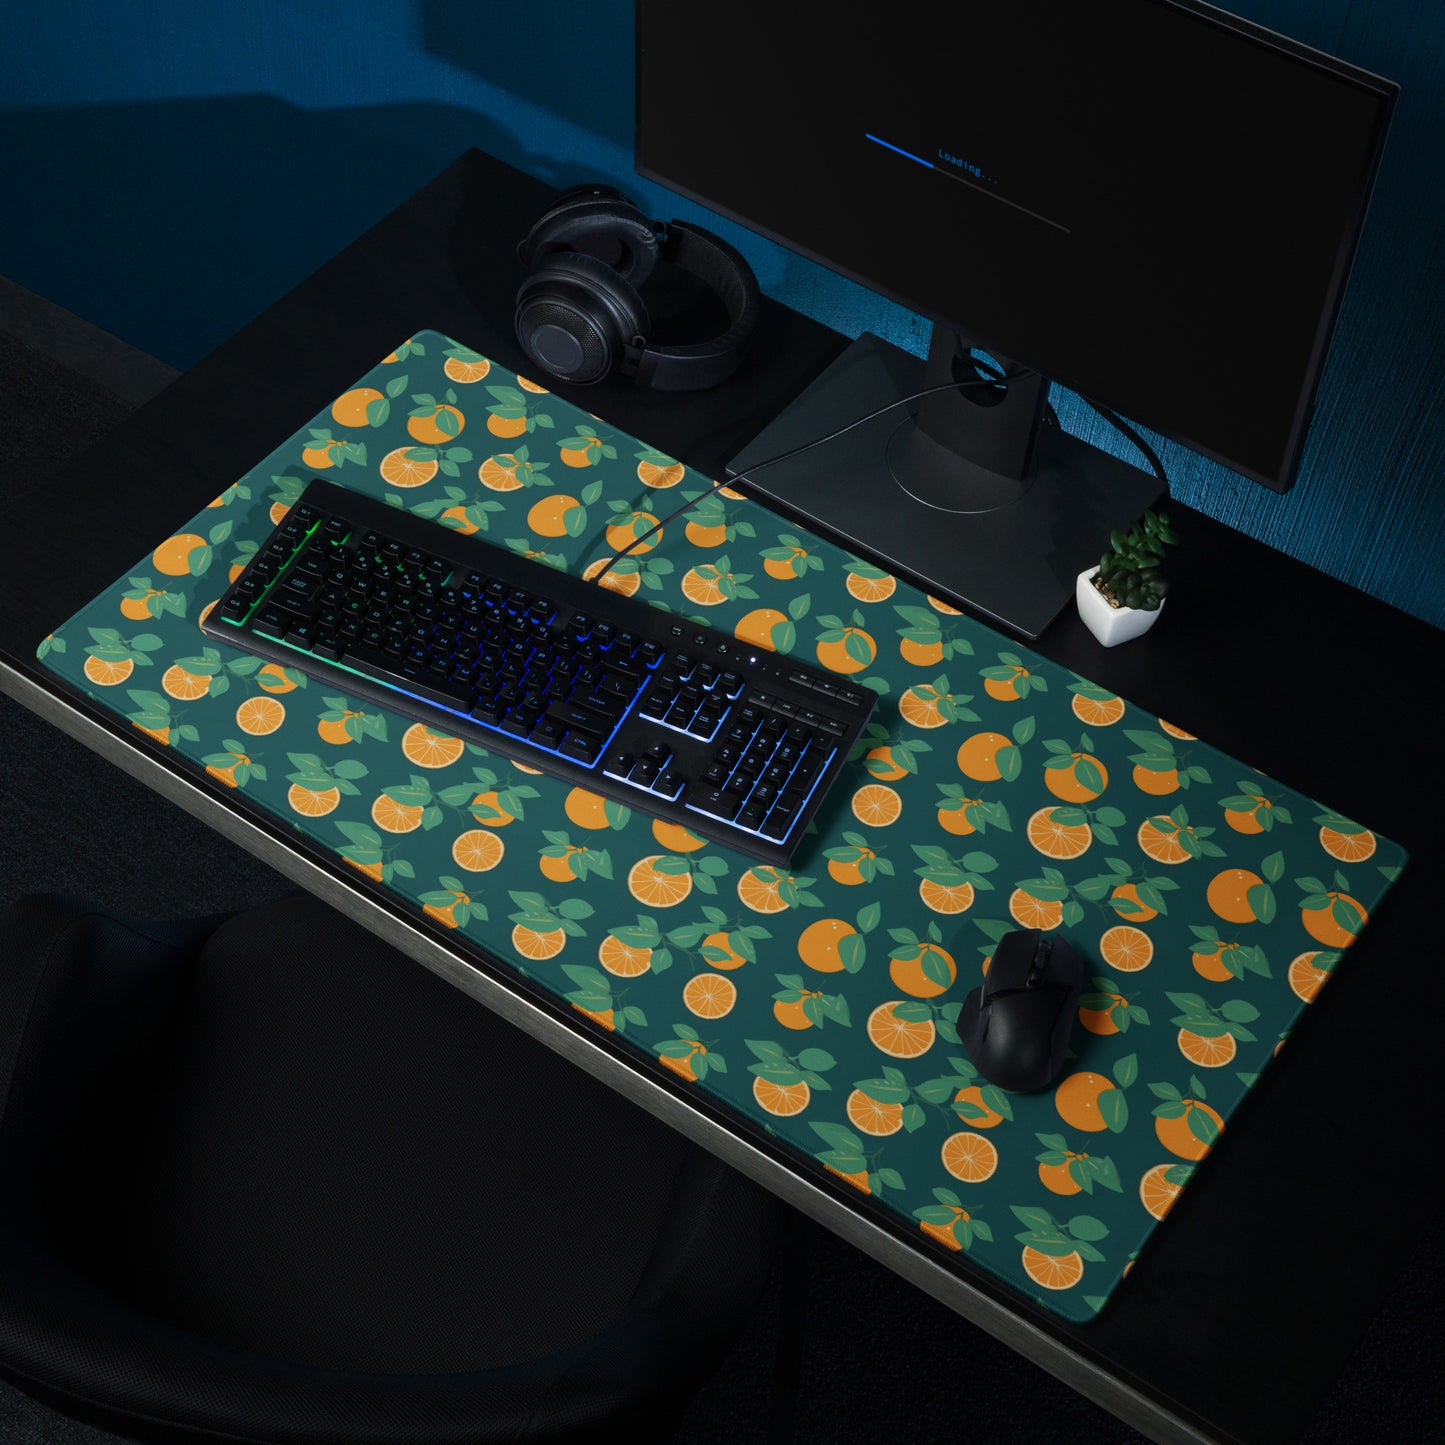 A 36" x 18" desk pad with oranges all over it shown on a desk setup. Orange and Blue in color.